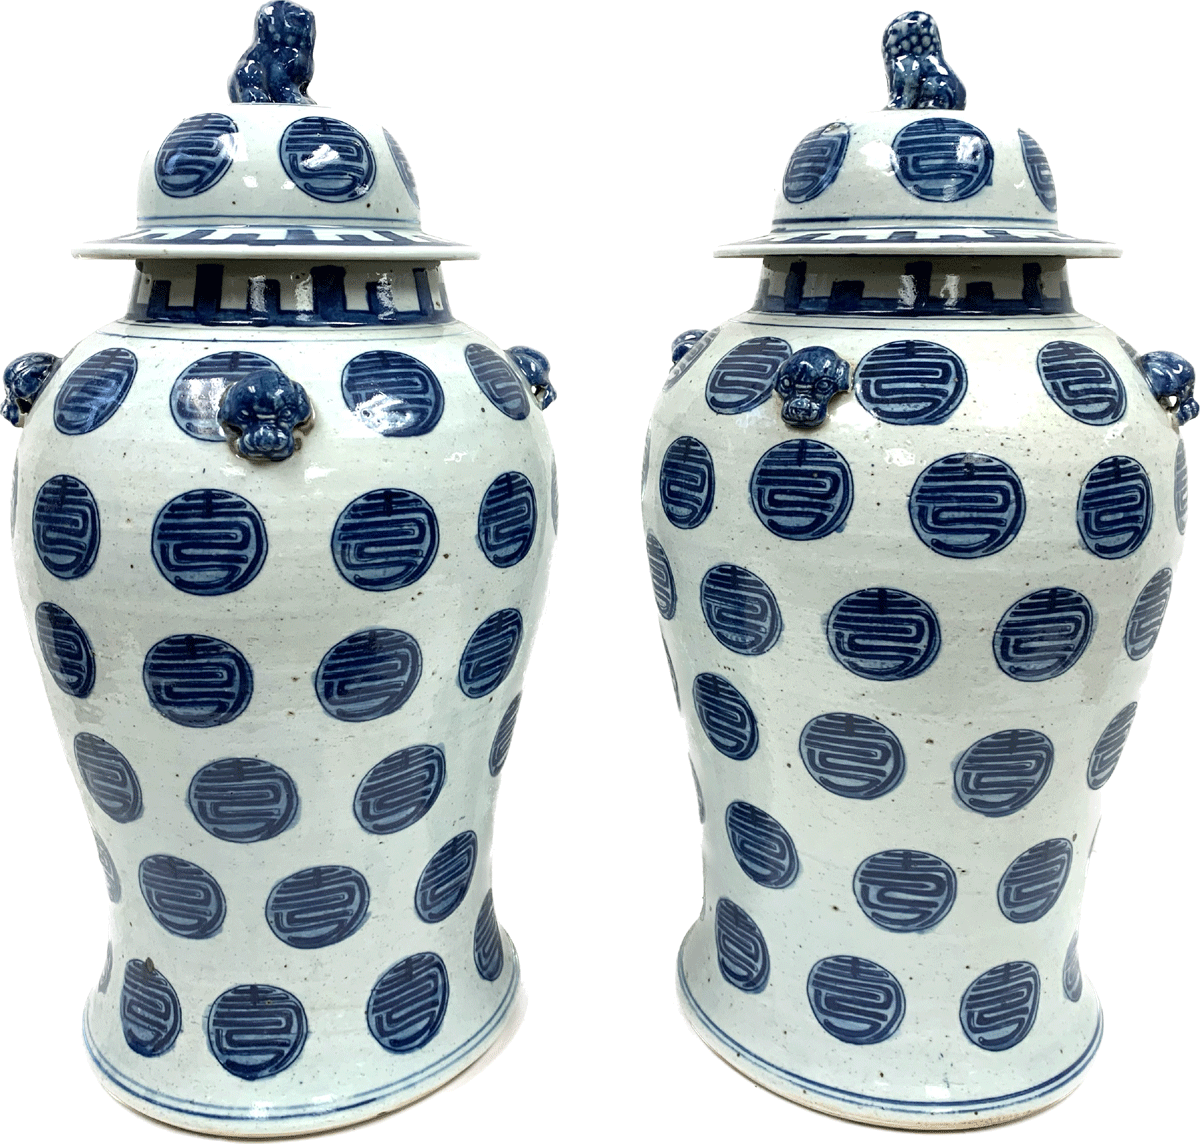 WHITE GINGER JAR WITH CREST – Consign & Design